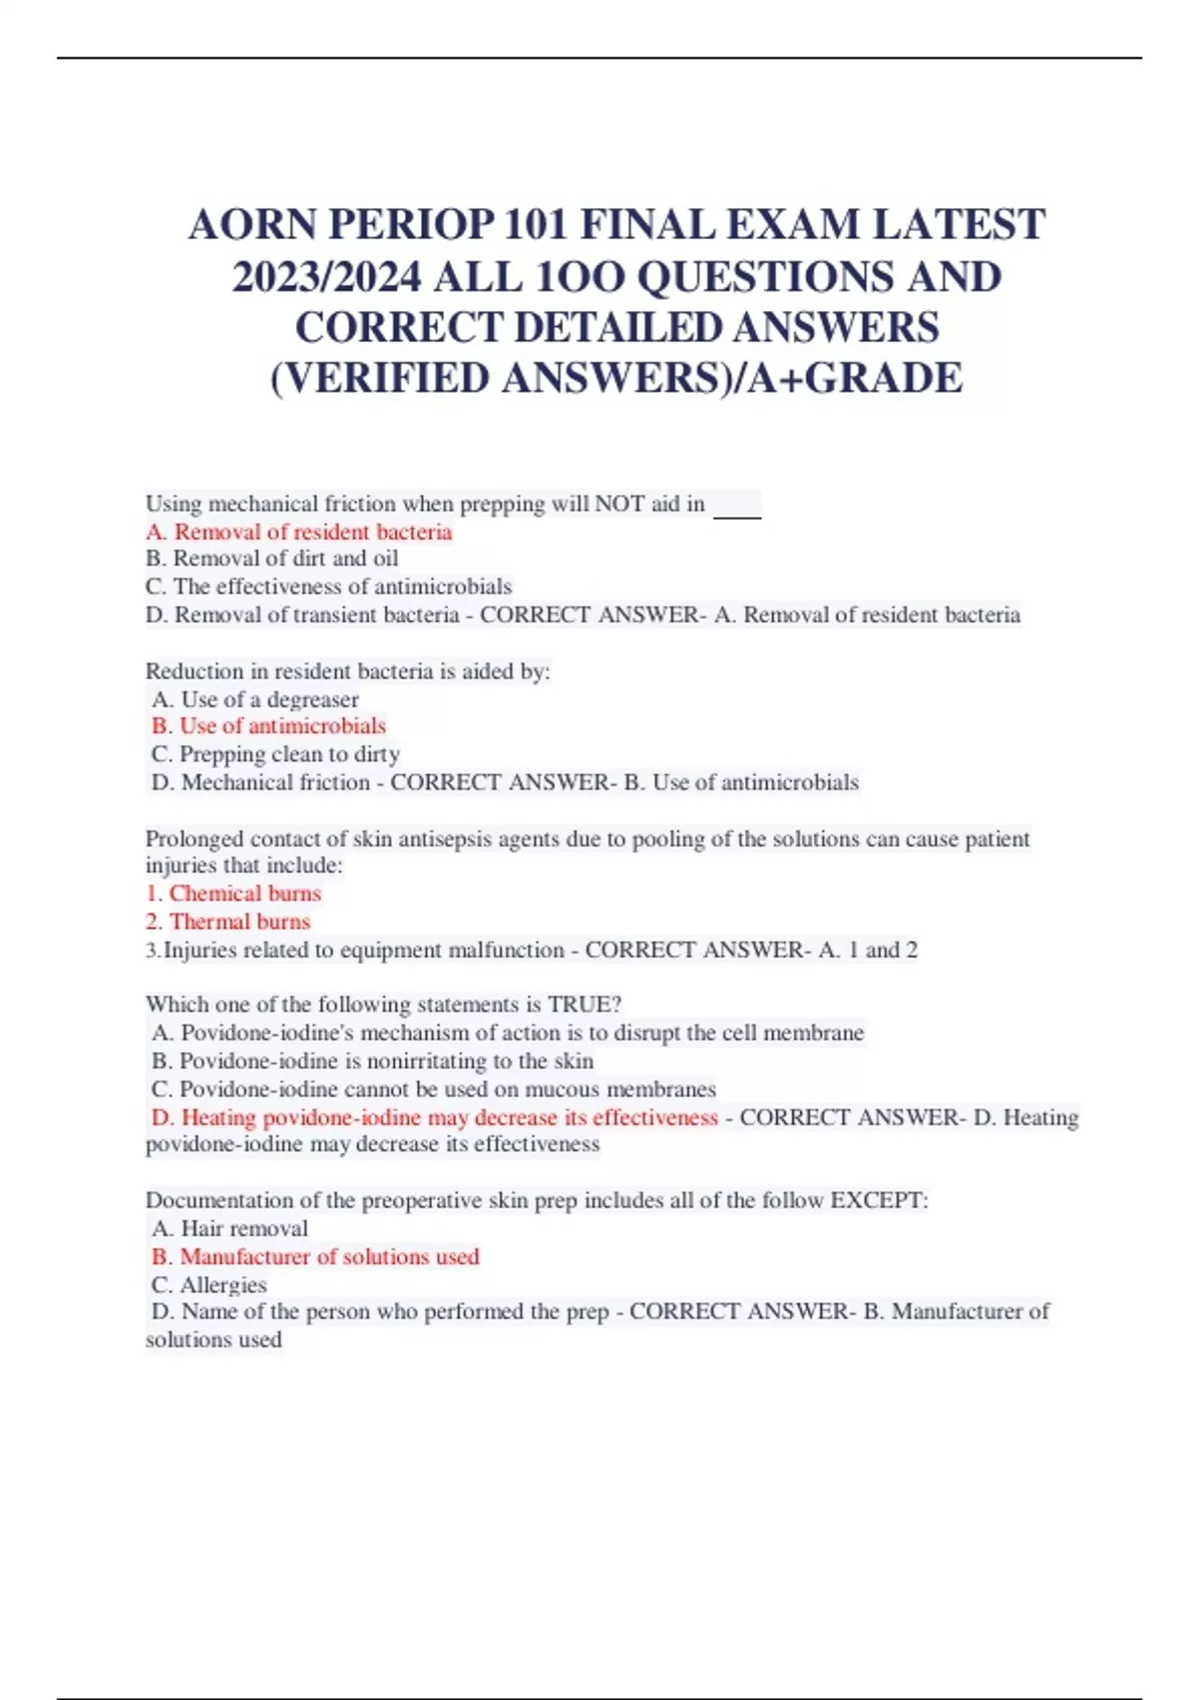 AORN PERIOP 101 FINAL EXAM LATEST 2023/2024 ALL 1OO QUESTIONS AND